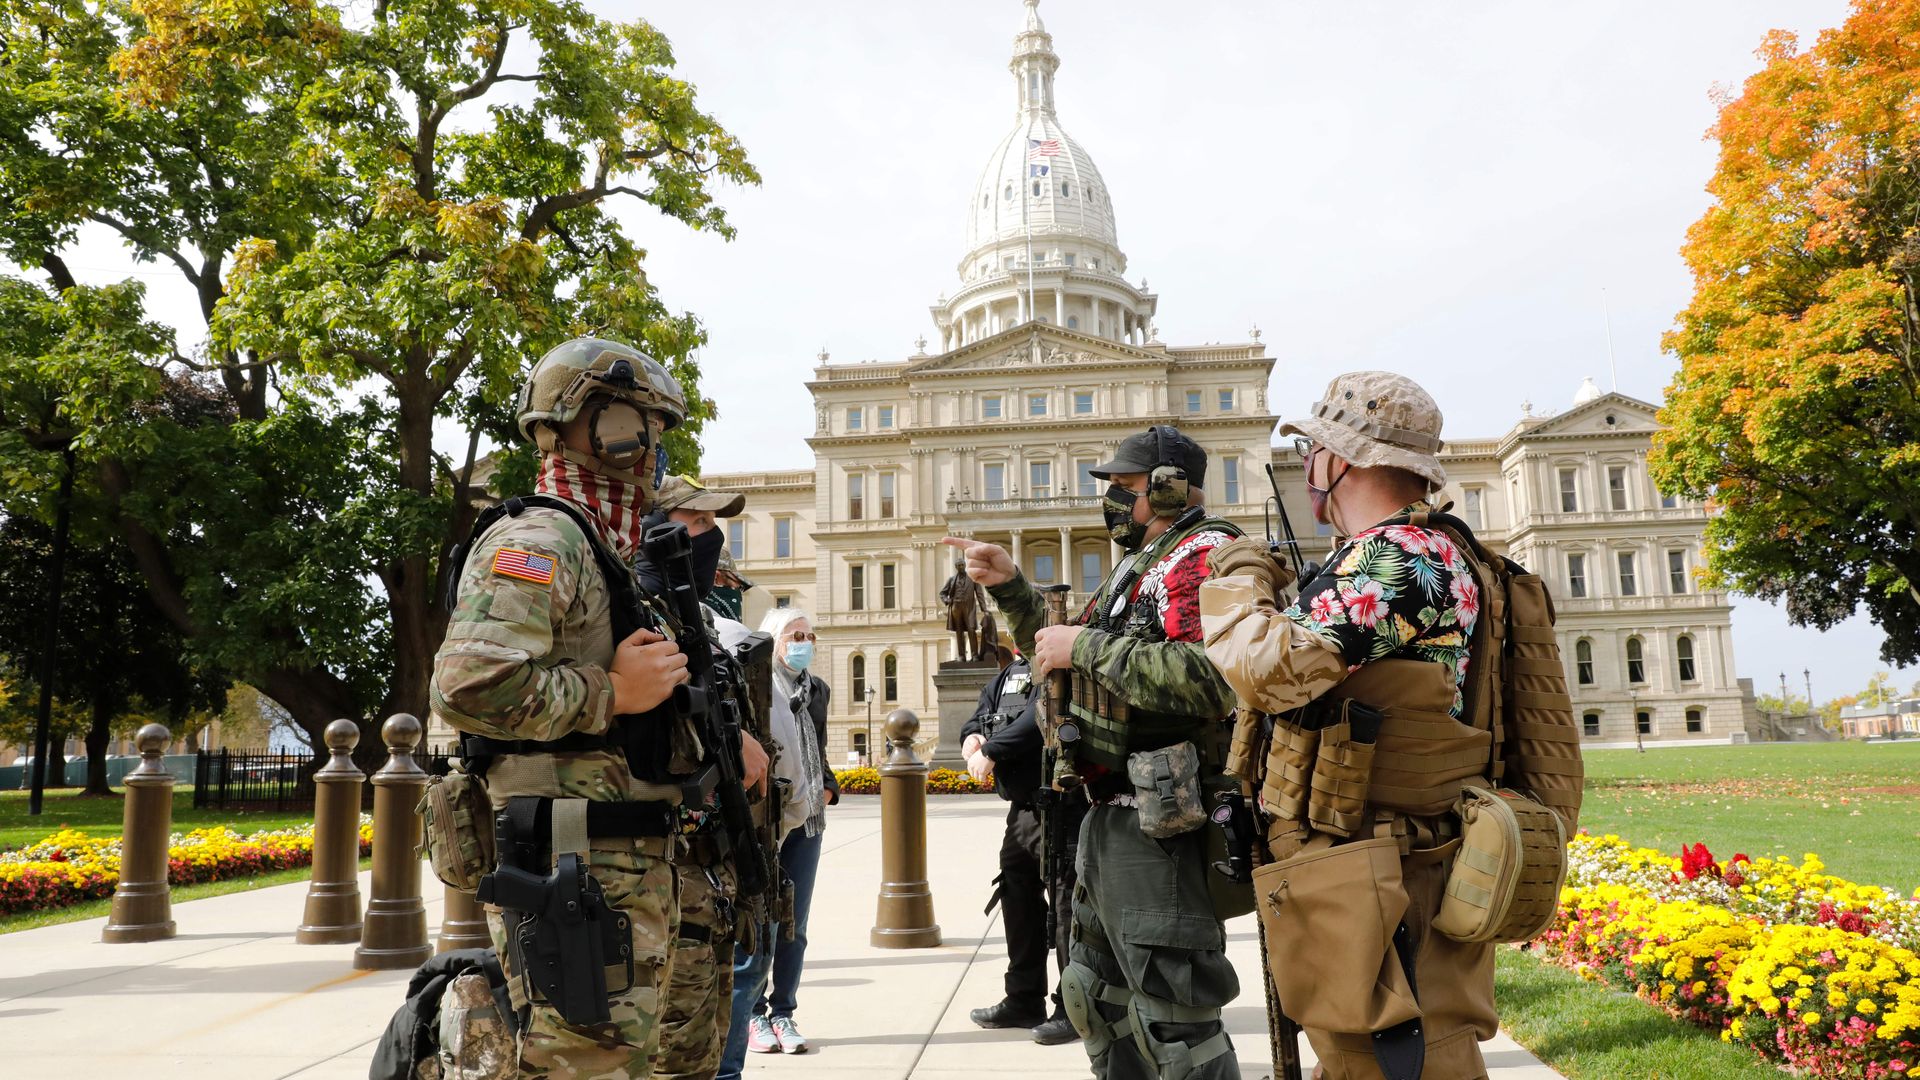 People carrying firearms at the Michigan State Capitol in Lansing, Michigan, on Oct. 17.